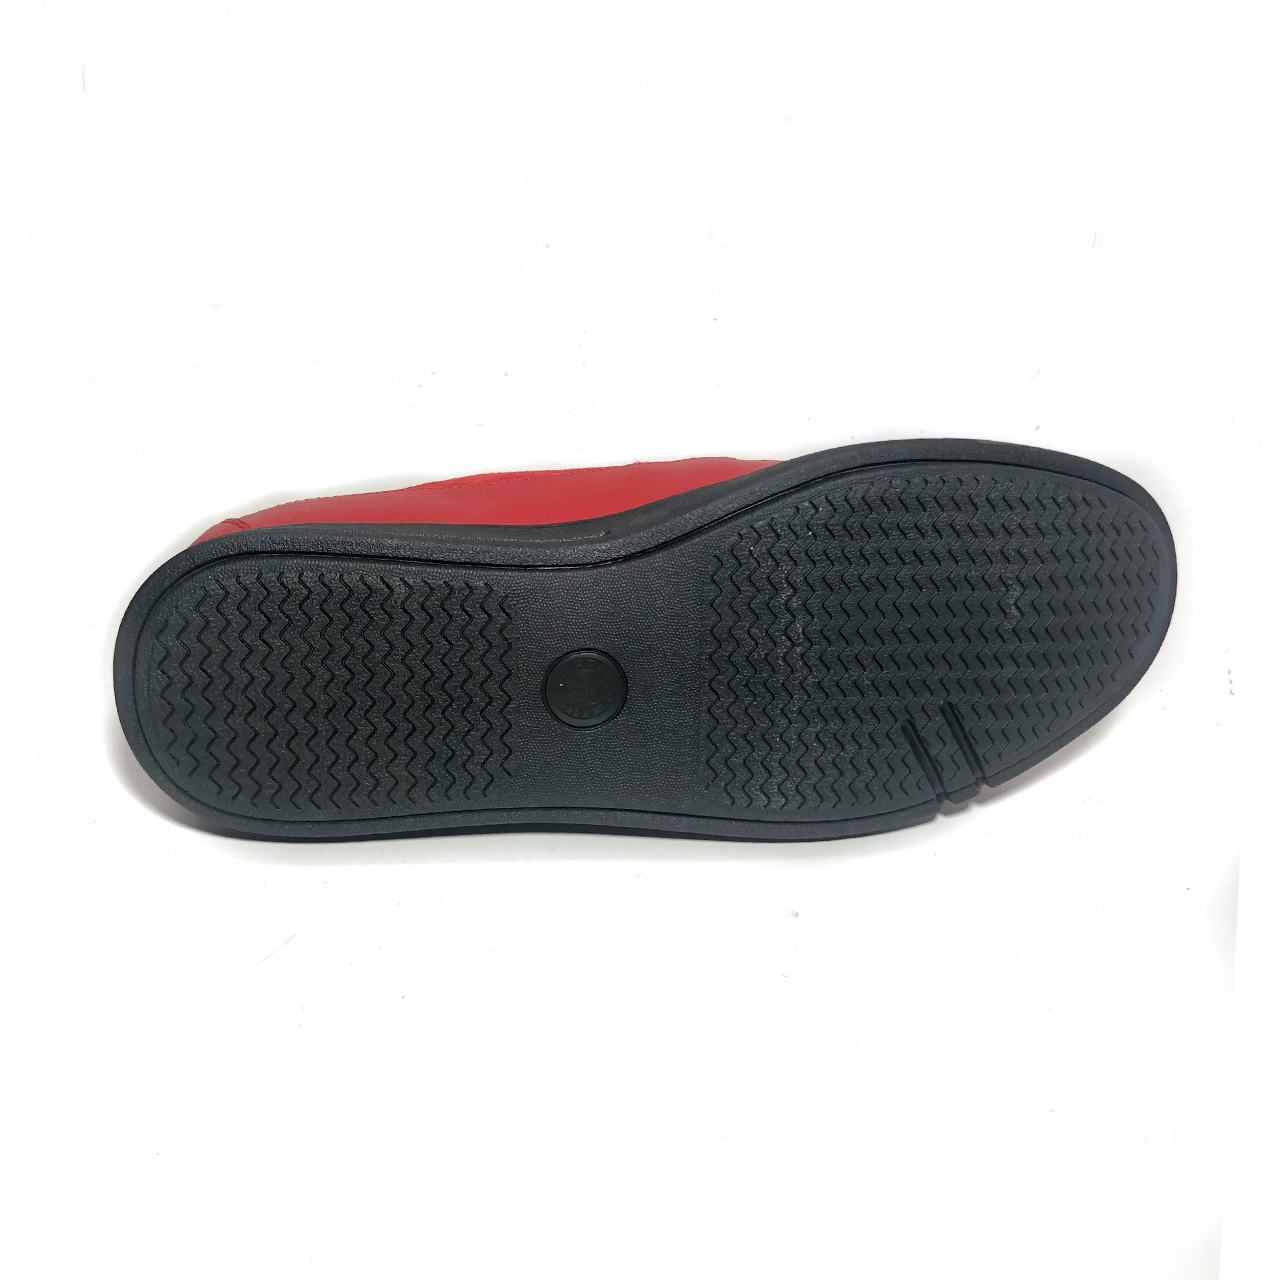 British Collection Westminster Red & Black Sole [1218-08] - $118.00 ...